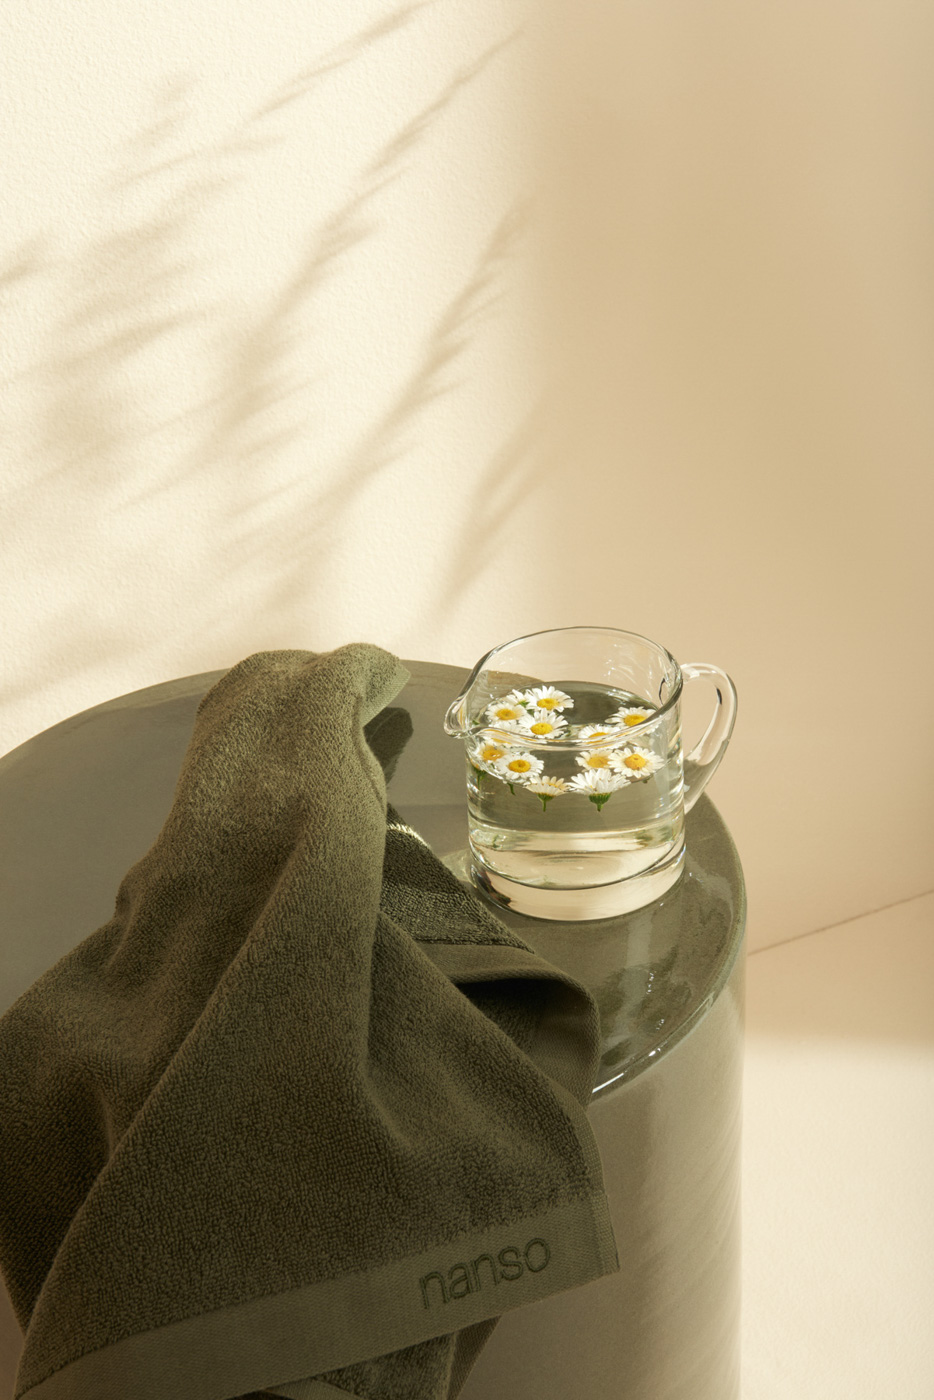 Green_towel_and_glass_jug_containing_daisies_and_water_on_ceramic_stool_on_beige_background_in_sunlight_for_Nanso_Home_collection_photographed_by_Sara_Lehtomaa